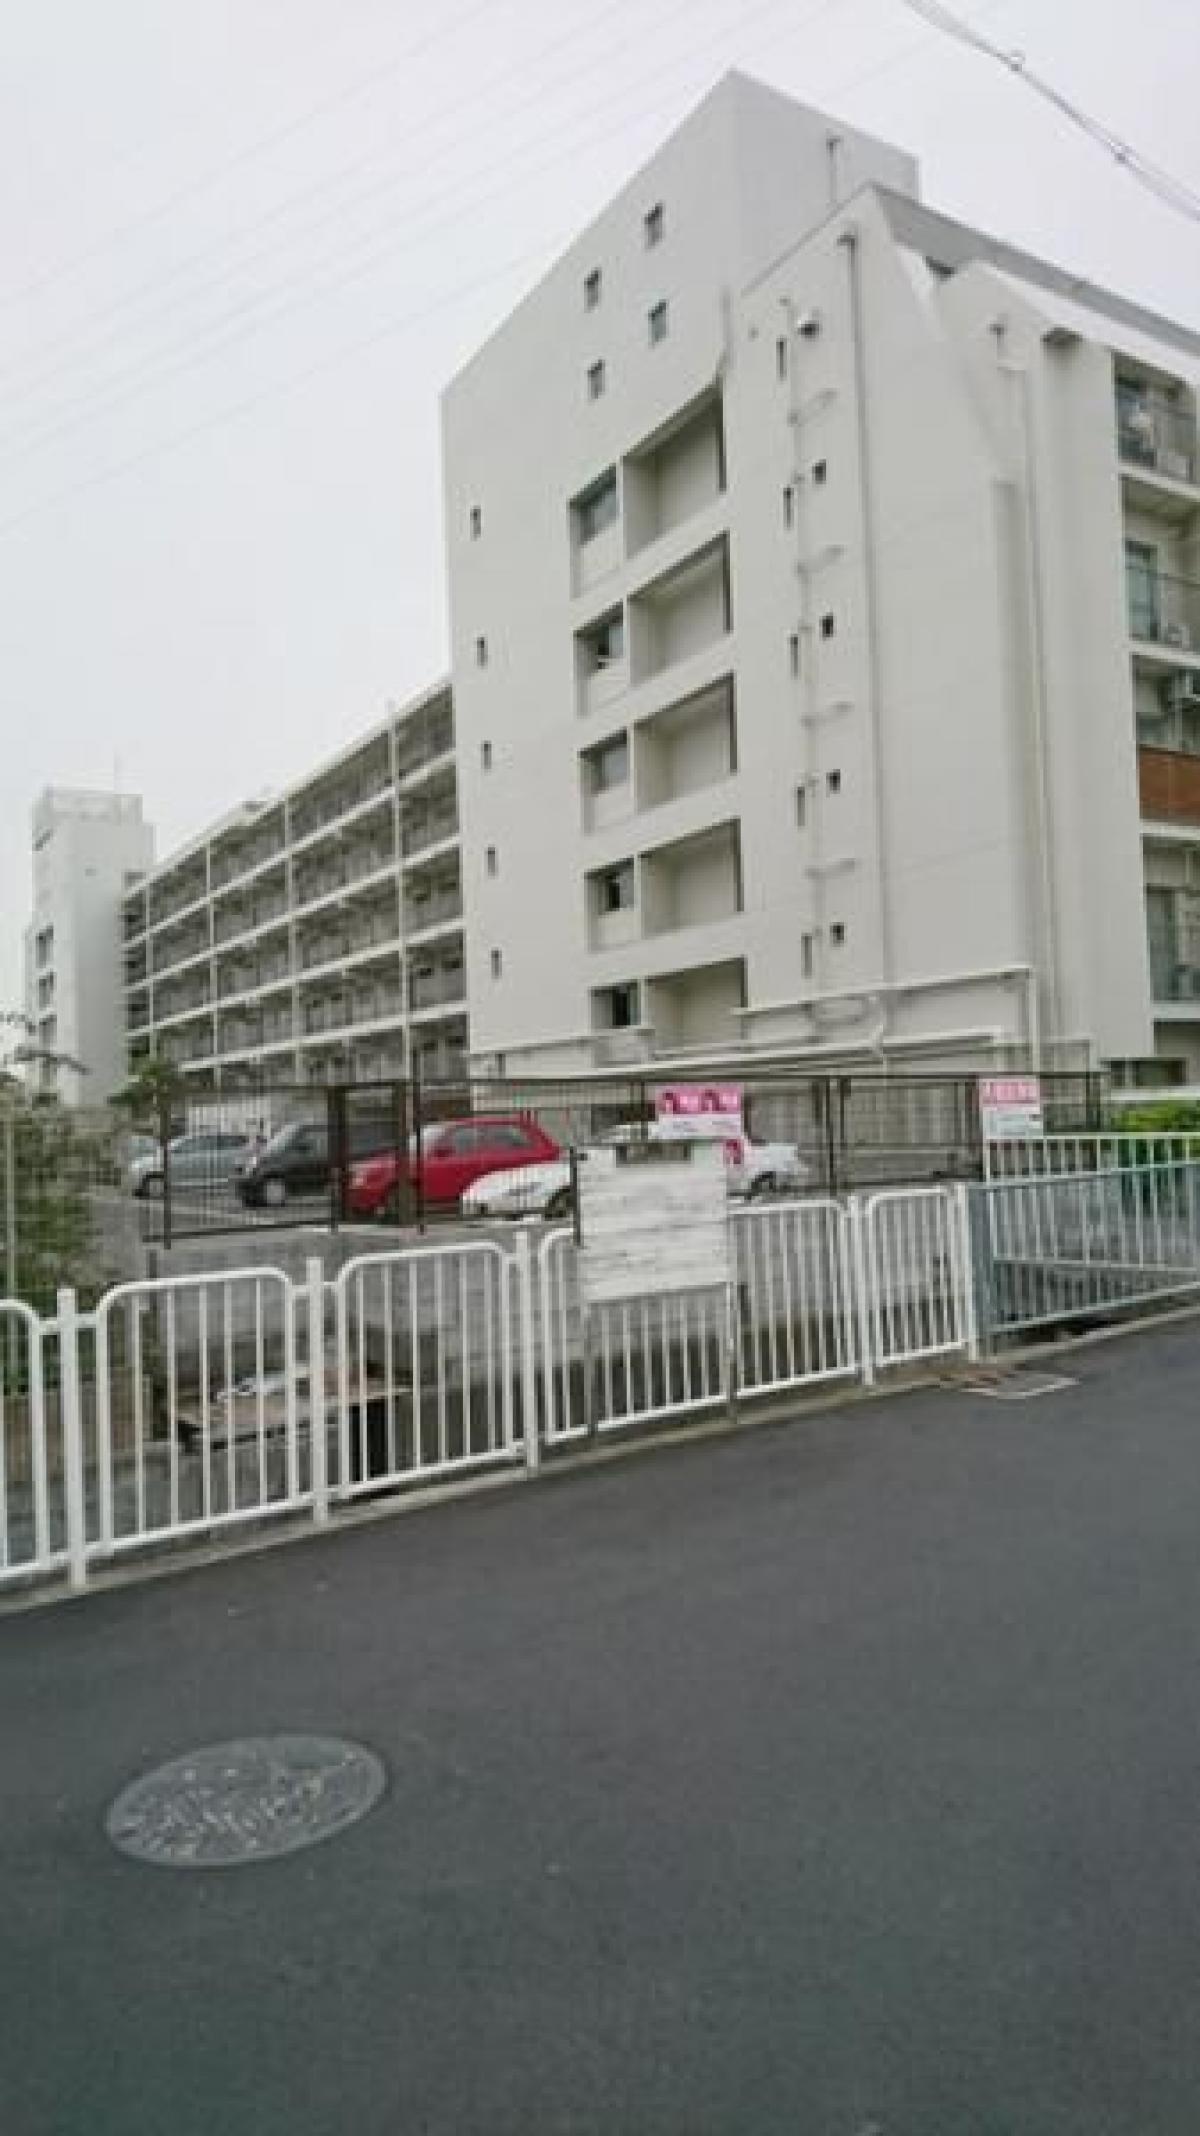 Picture of Apartment For Sale in Amagasaki Shi, Hyogo, Japan